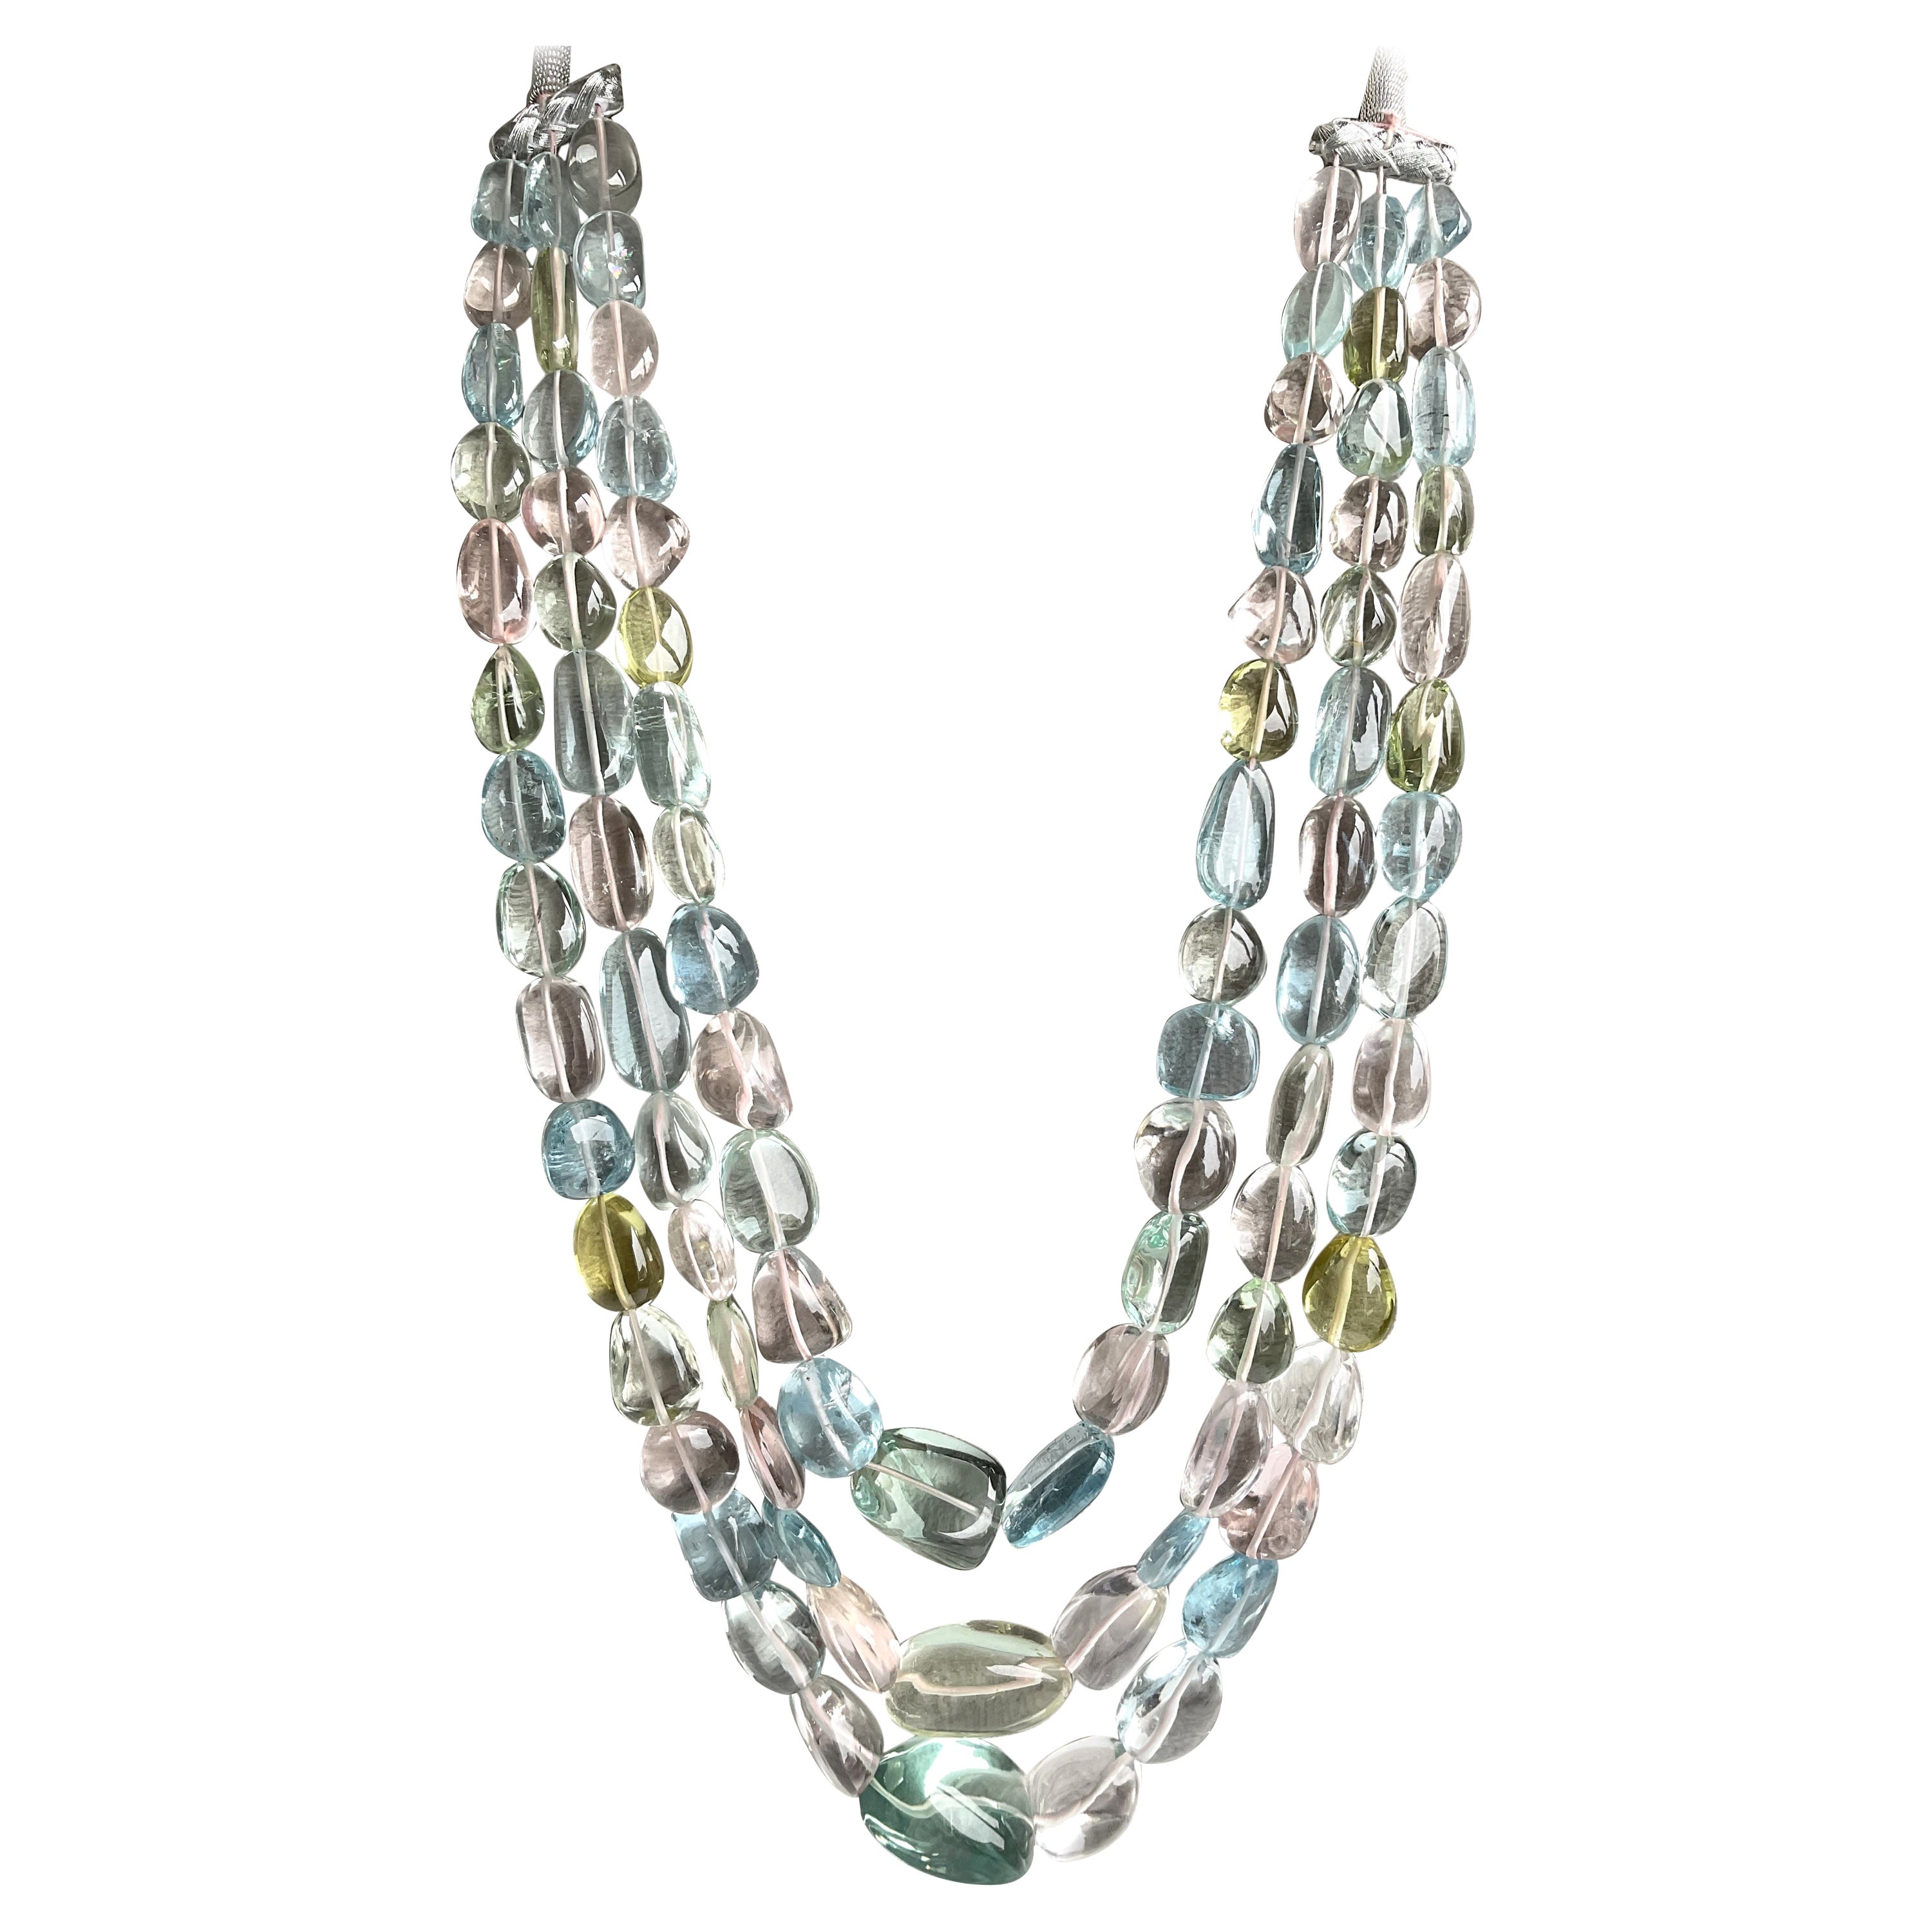 1362.55 Carats Multiple colors Beryl Tumbled Necklace For Fine Jewelry Gemstones For Sale